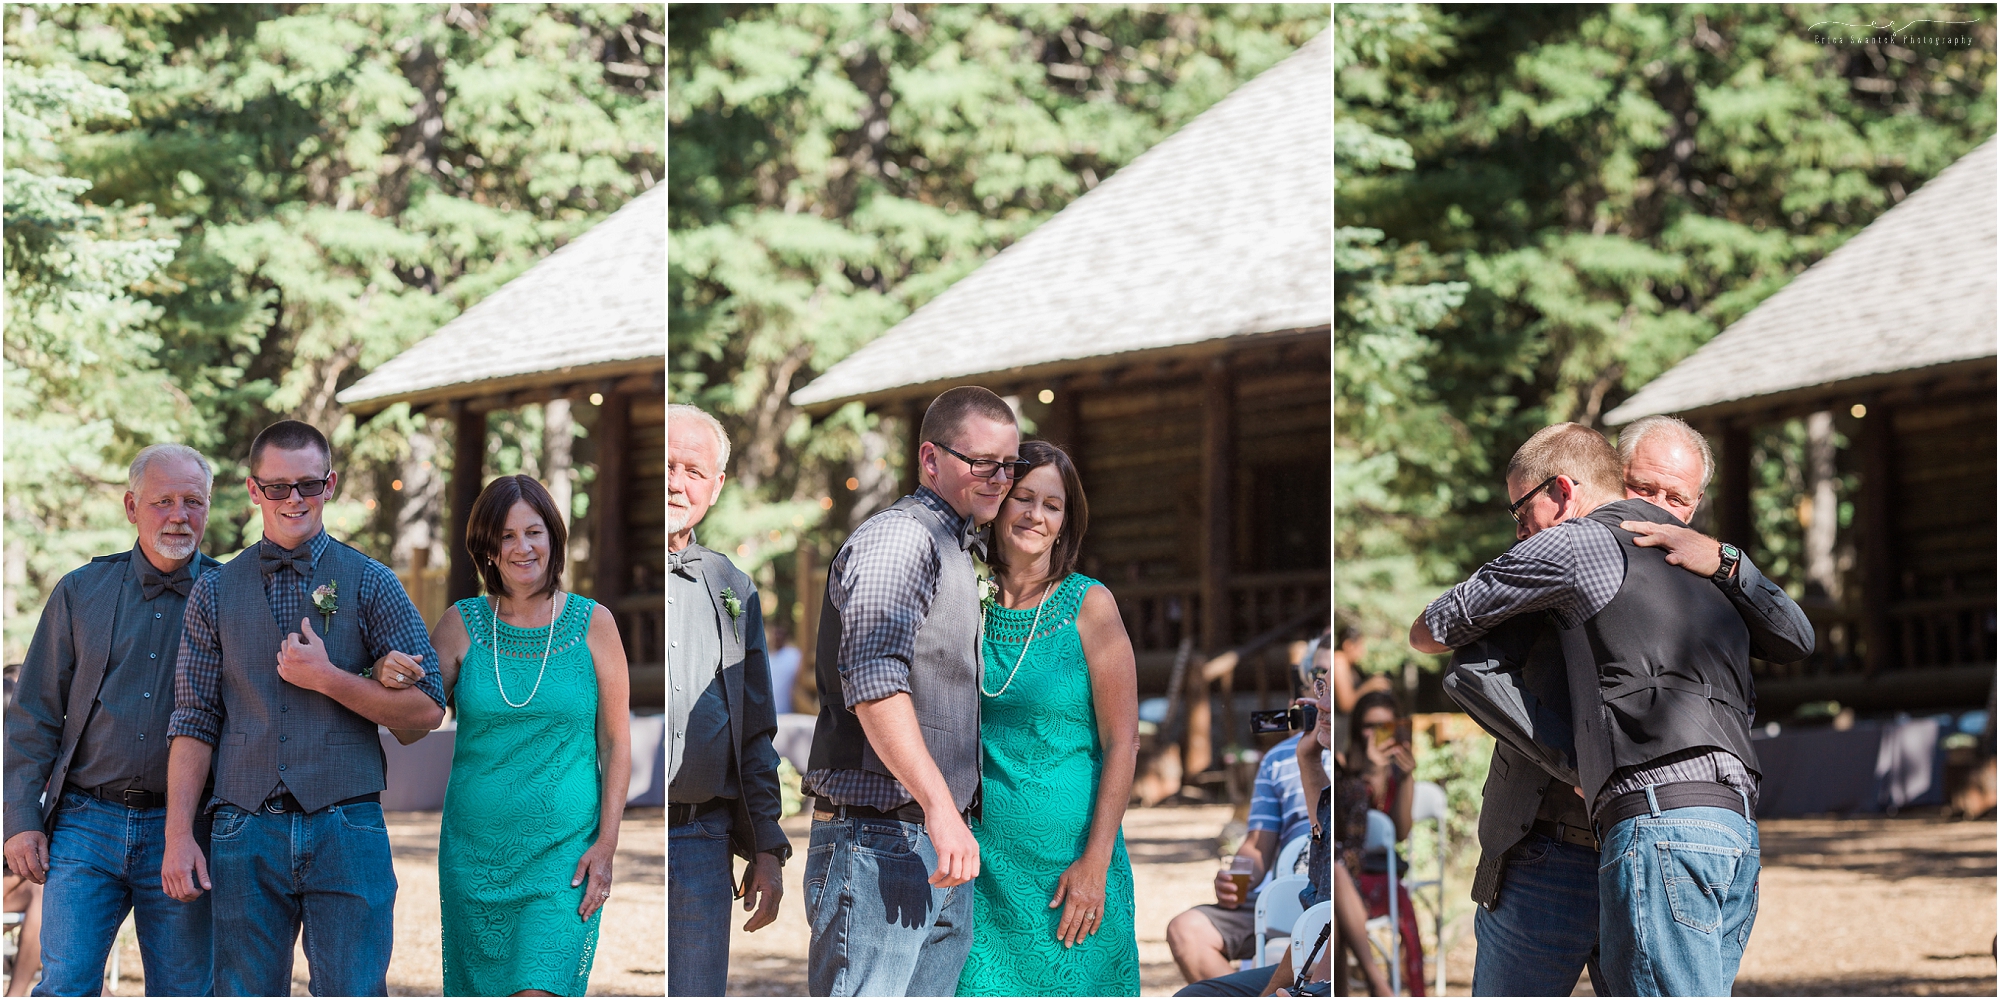 The groom & his parents at the processional for this outdoor rustic Oregon lodge wedding in Bend. 